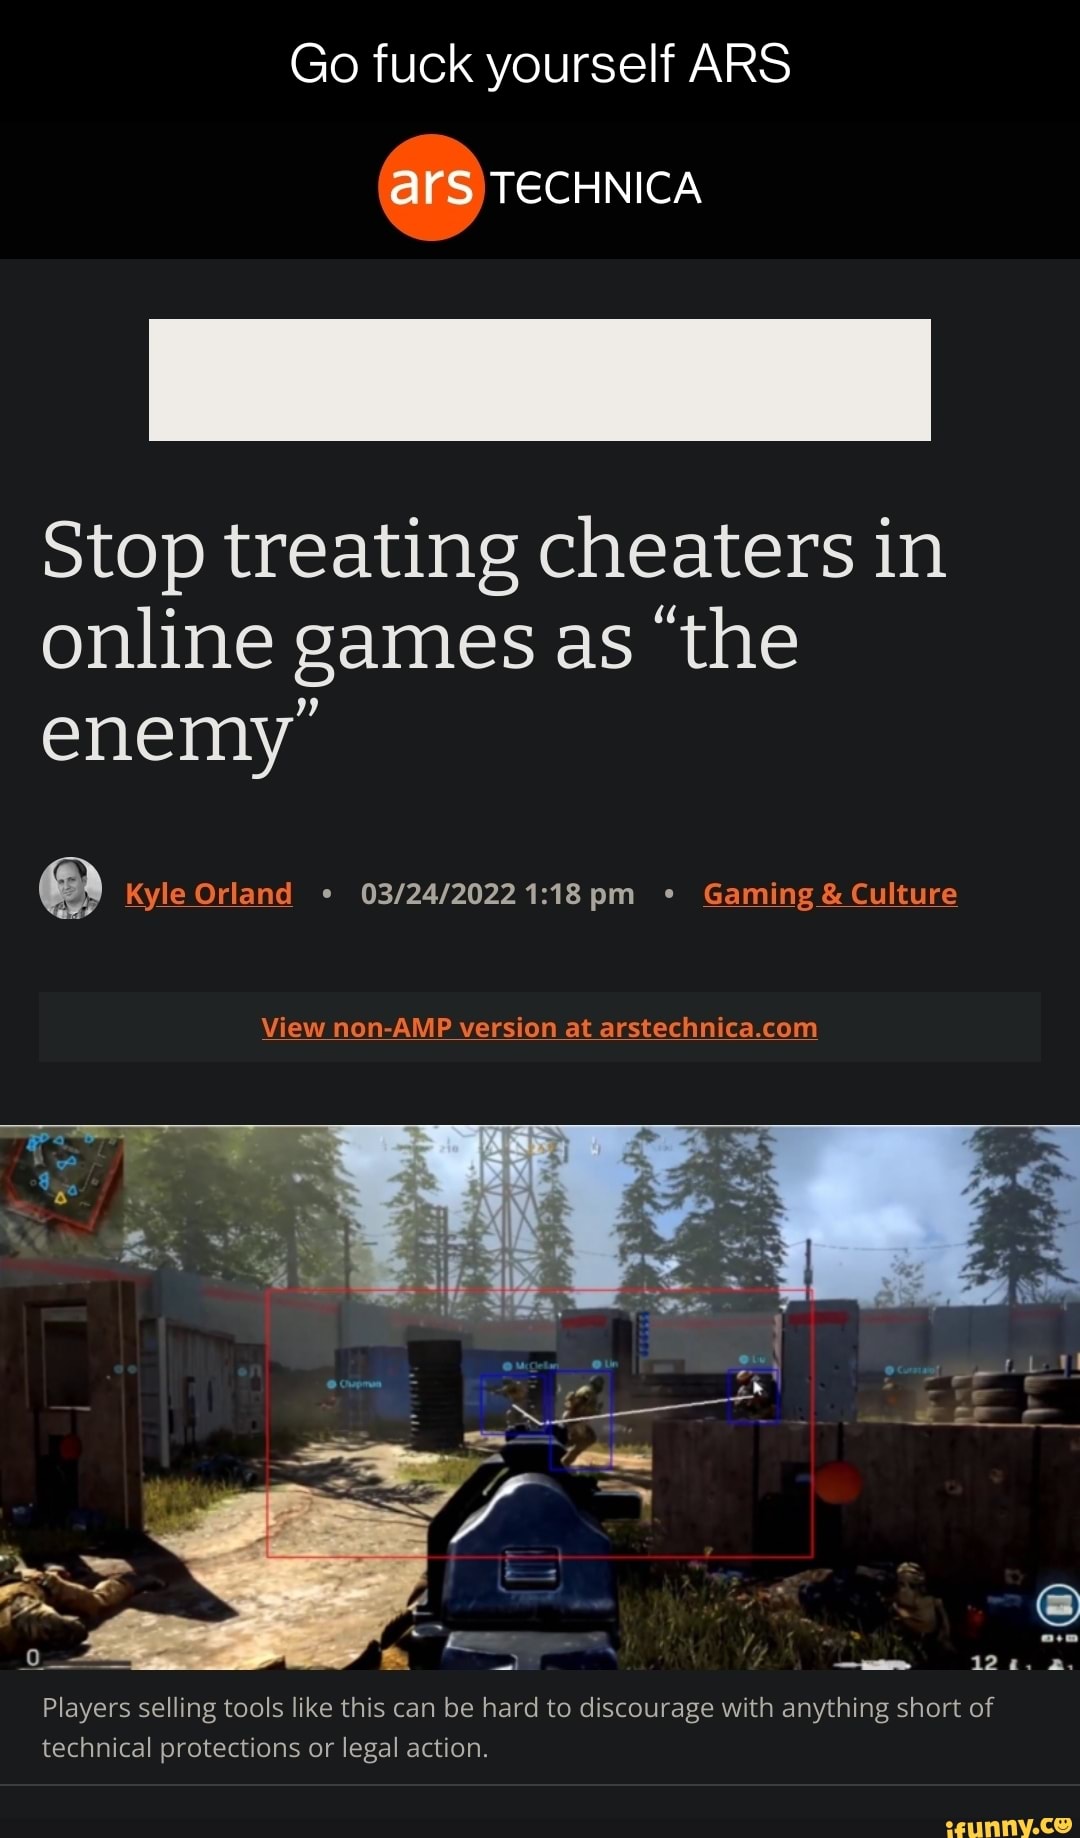 Stop treating cheaters in online games as “the enemy”